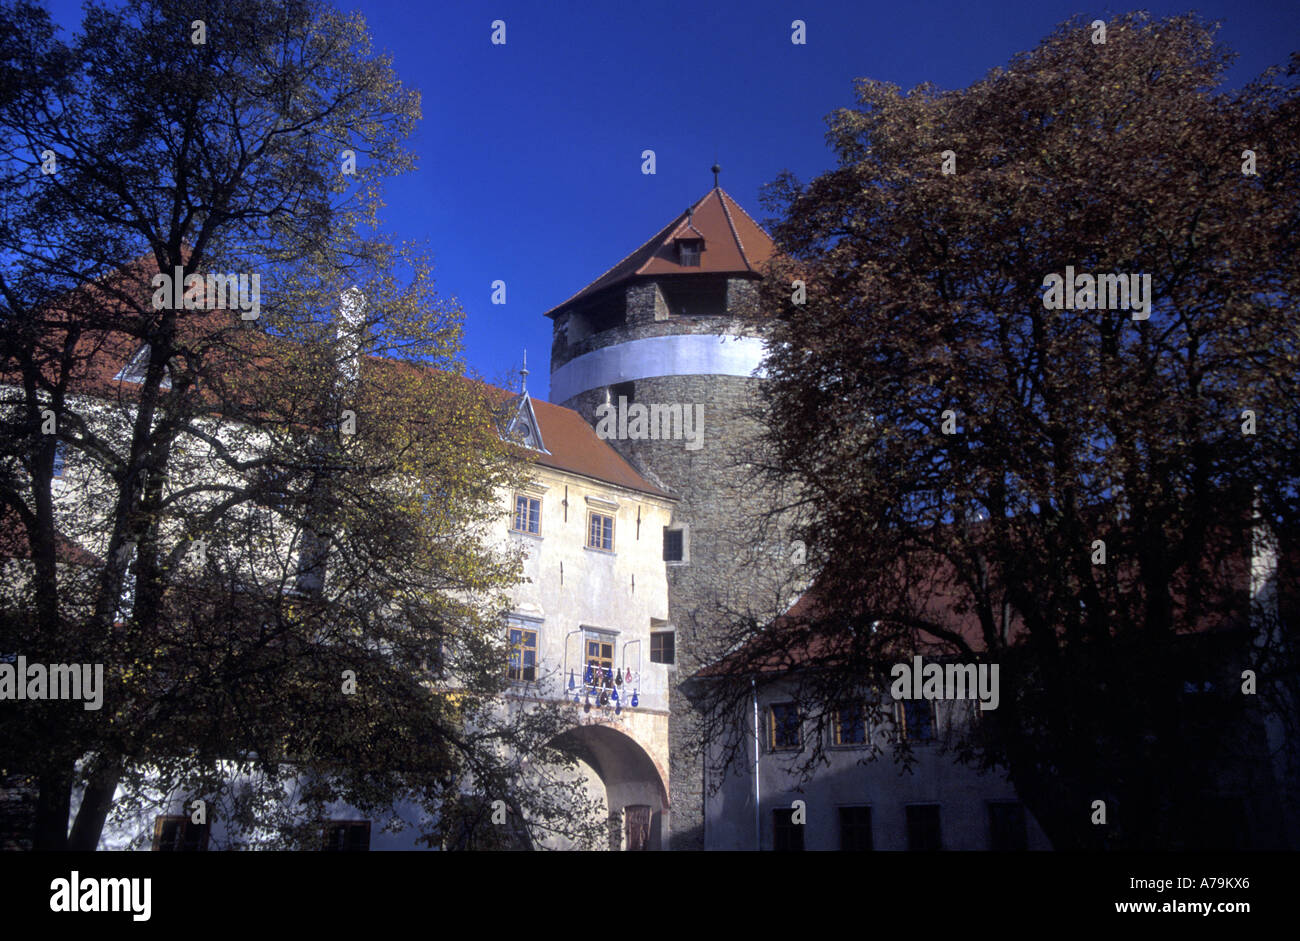 View of courtyard and autumn trees in Burg Schlaining, an ancient castle in Burgenland, Austria Stock Photo